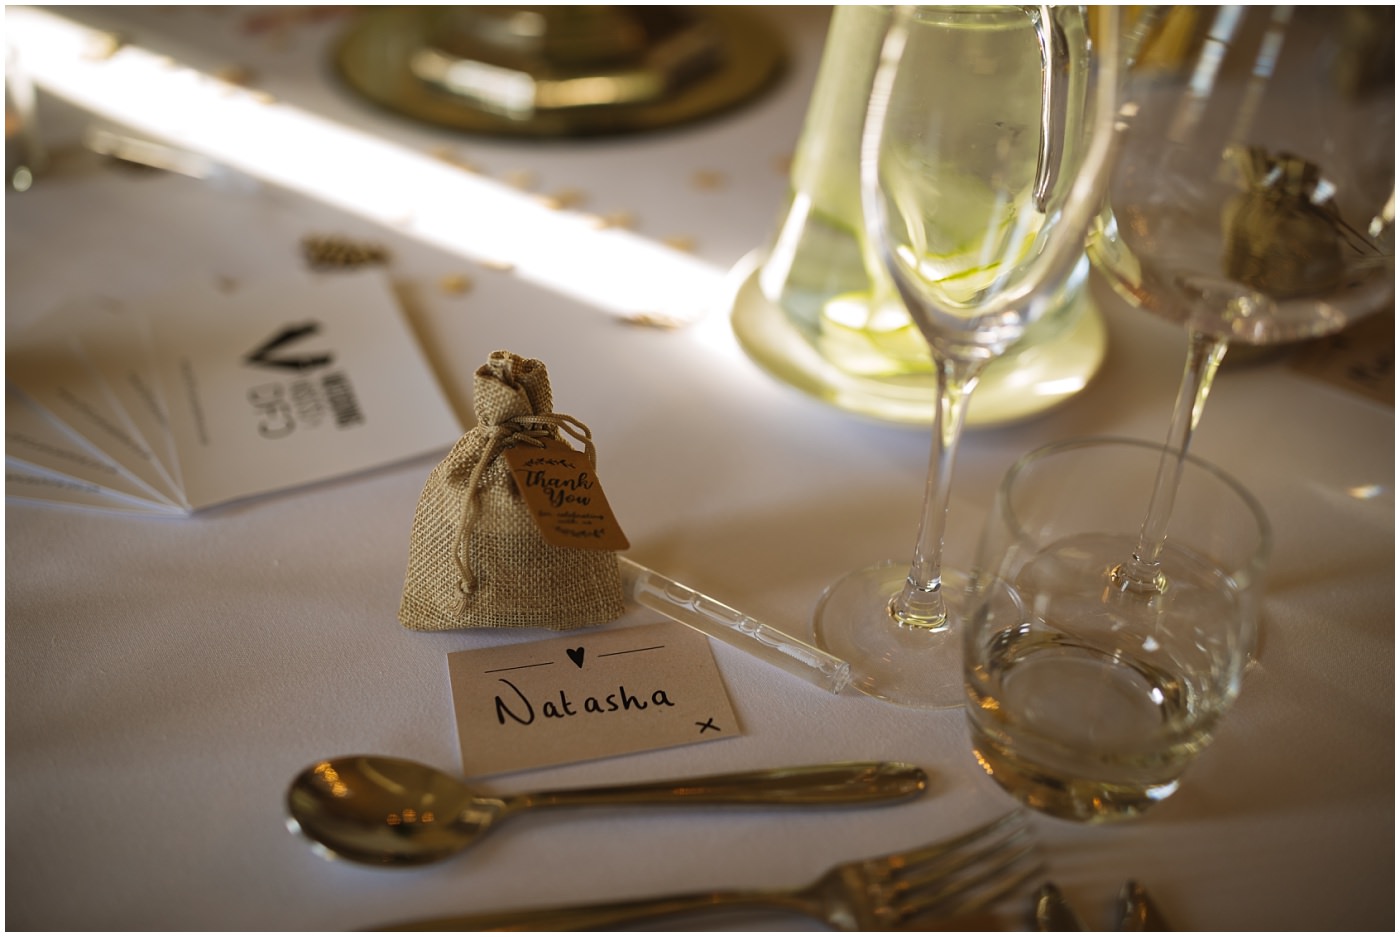 Hessian wedding favour bags and table setting inspiration